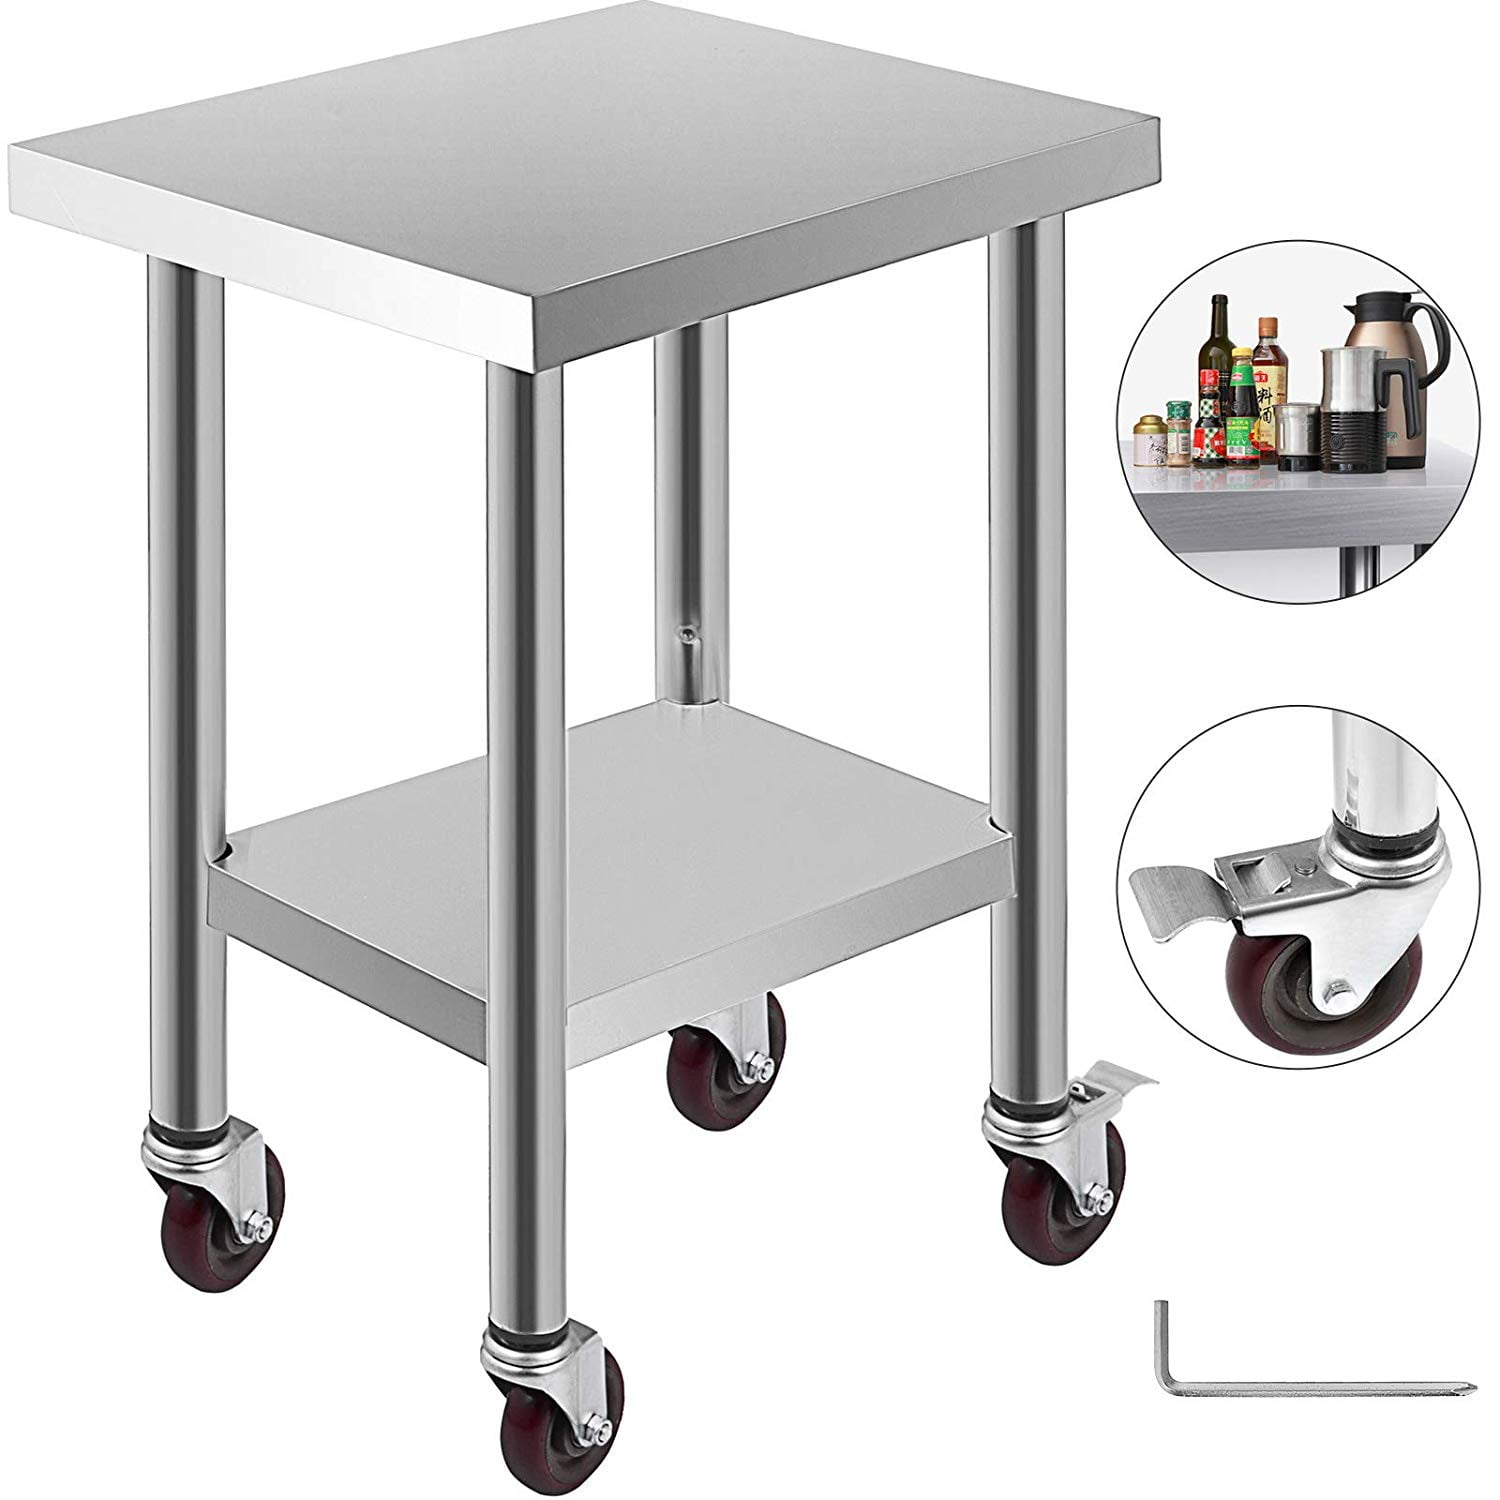 24"x18"Stainless Steel Work Table 3-Stage Adjustable Shelf with 4 Stainless Steel Table With Wheels